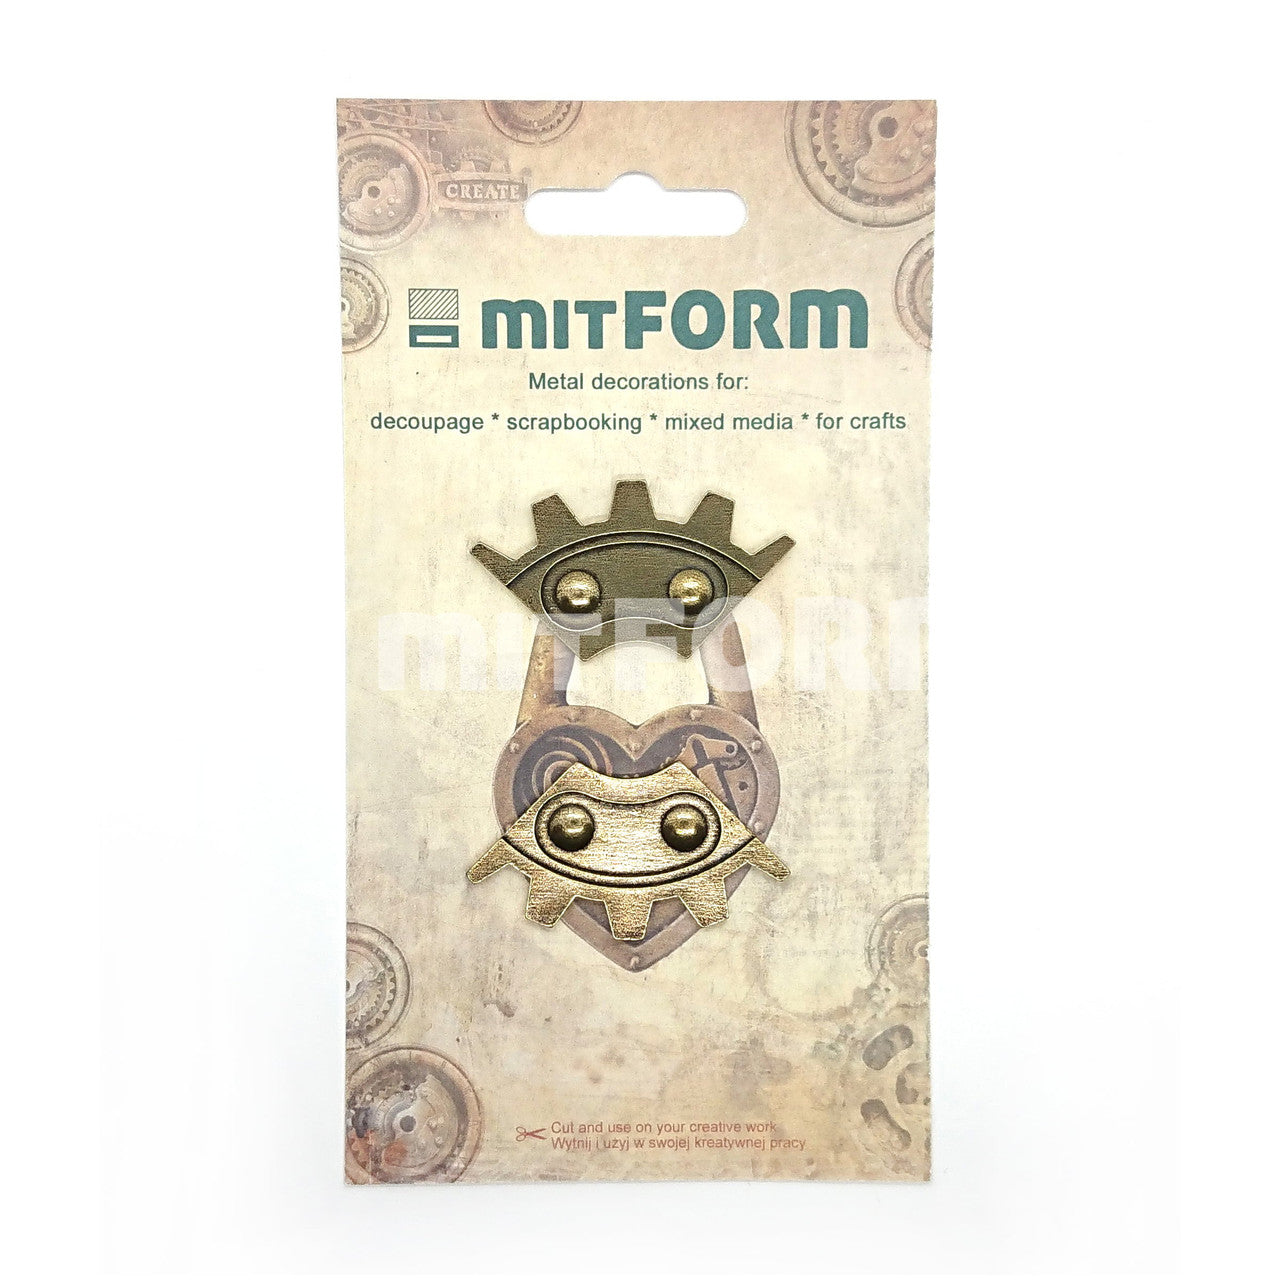 Mitform Castings Set "Corners 8" available at Milton's Daughter. Package photo.